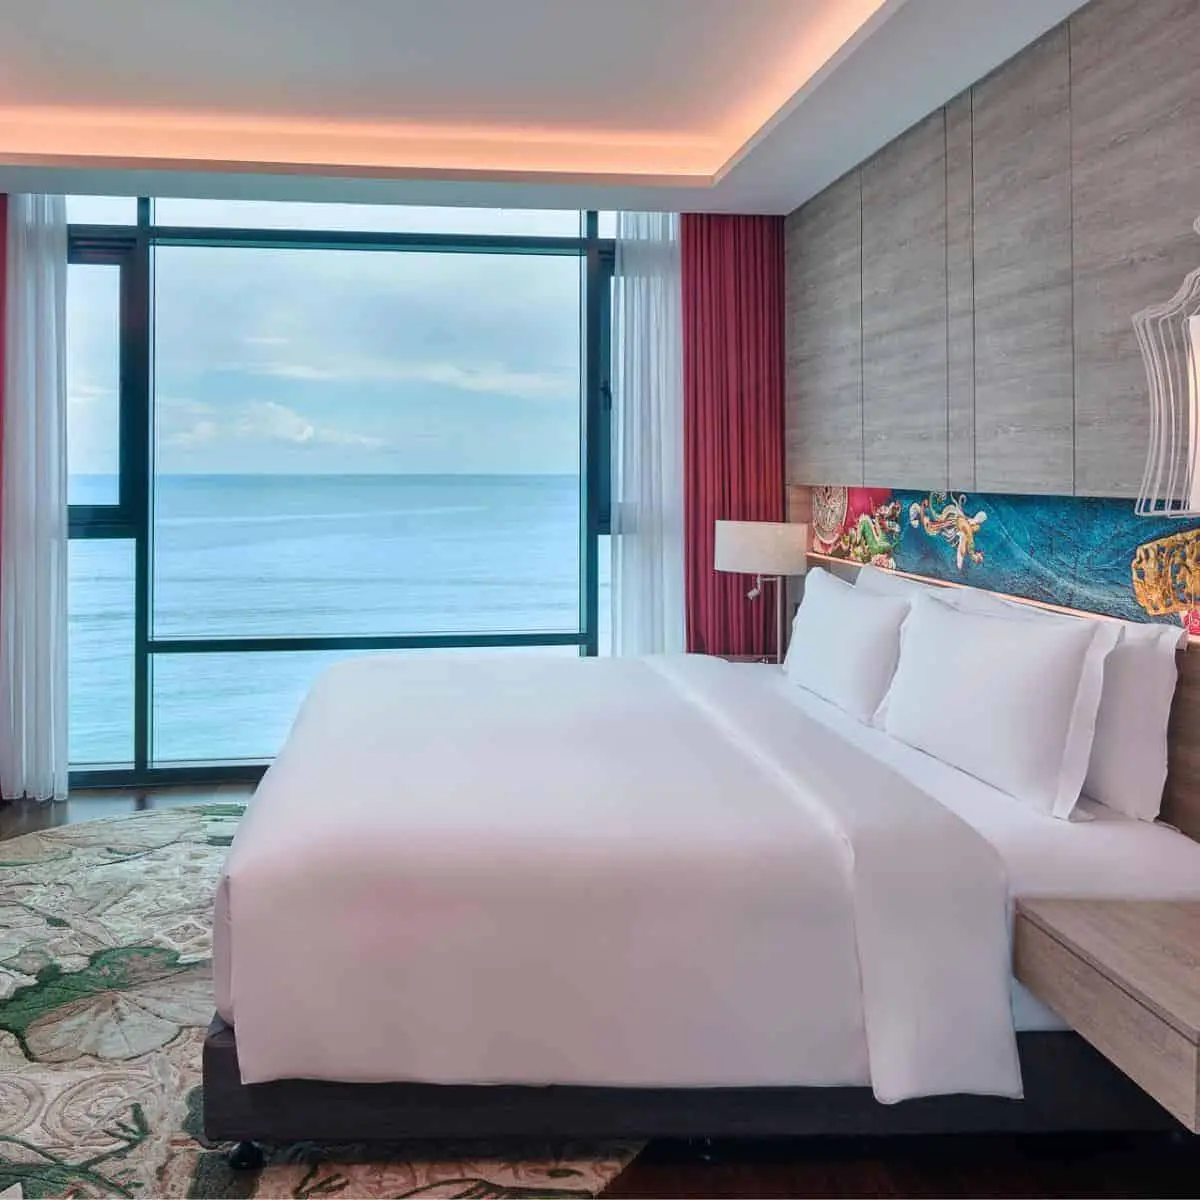 Penang Hotel with an astonishing bedside sea view